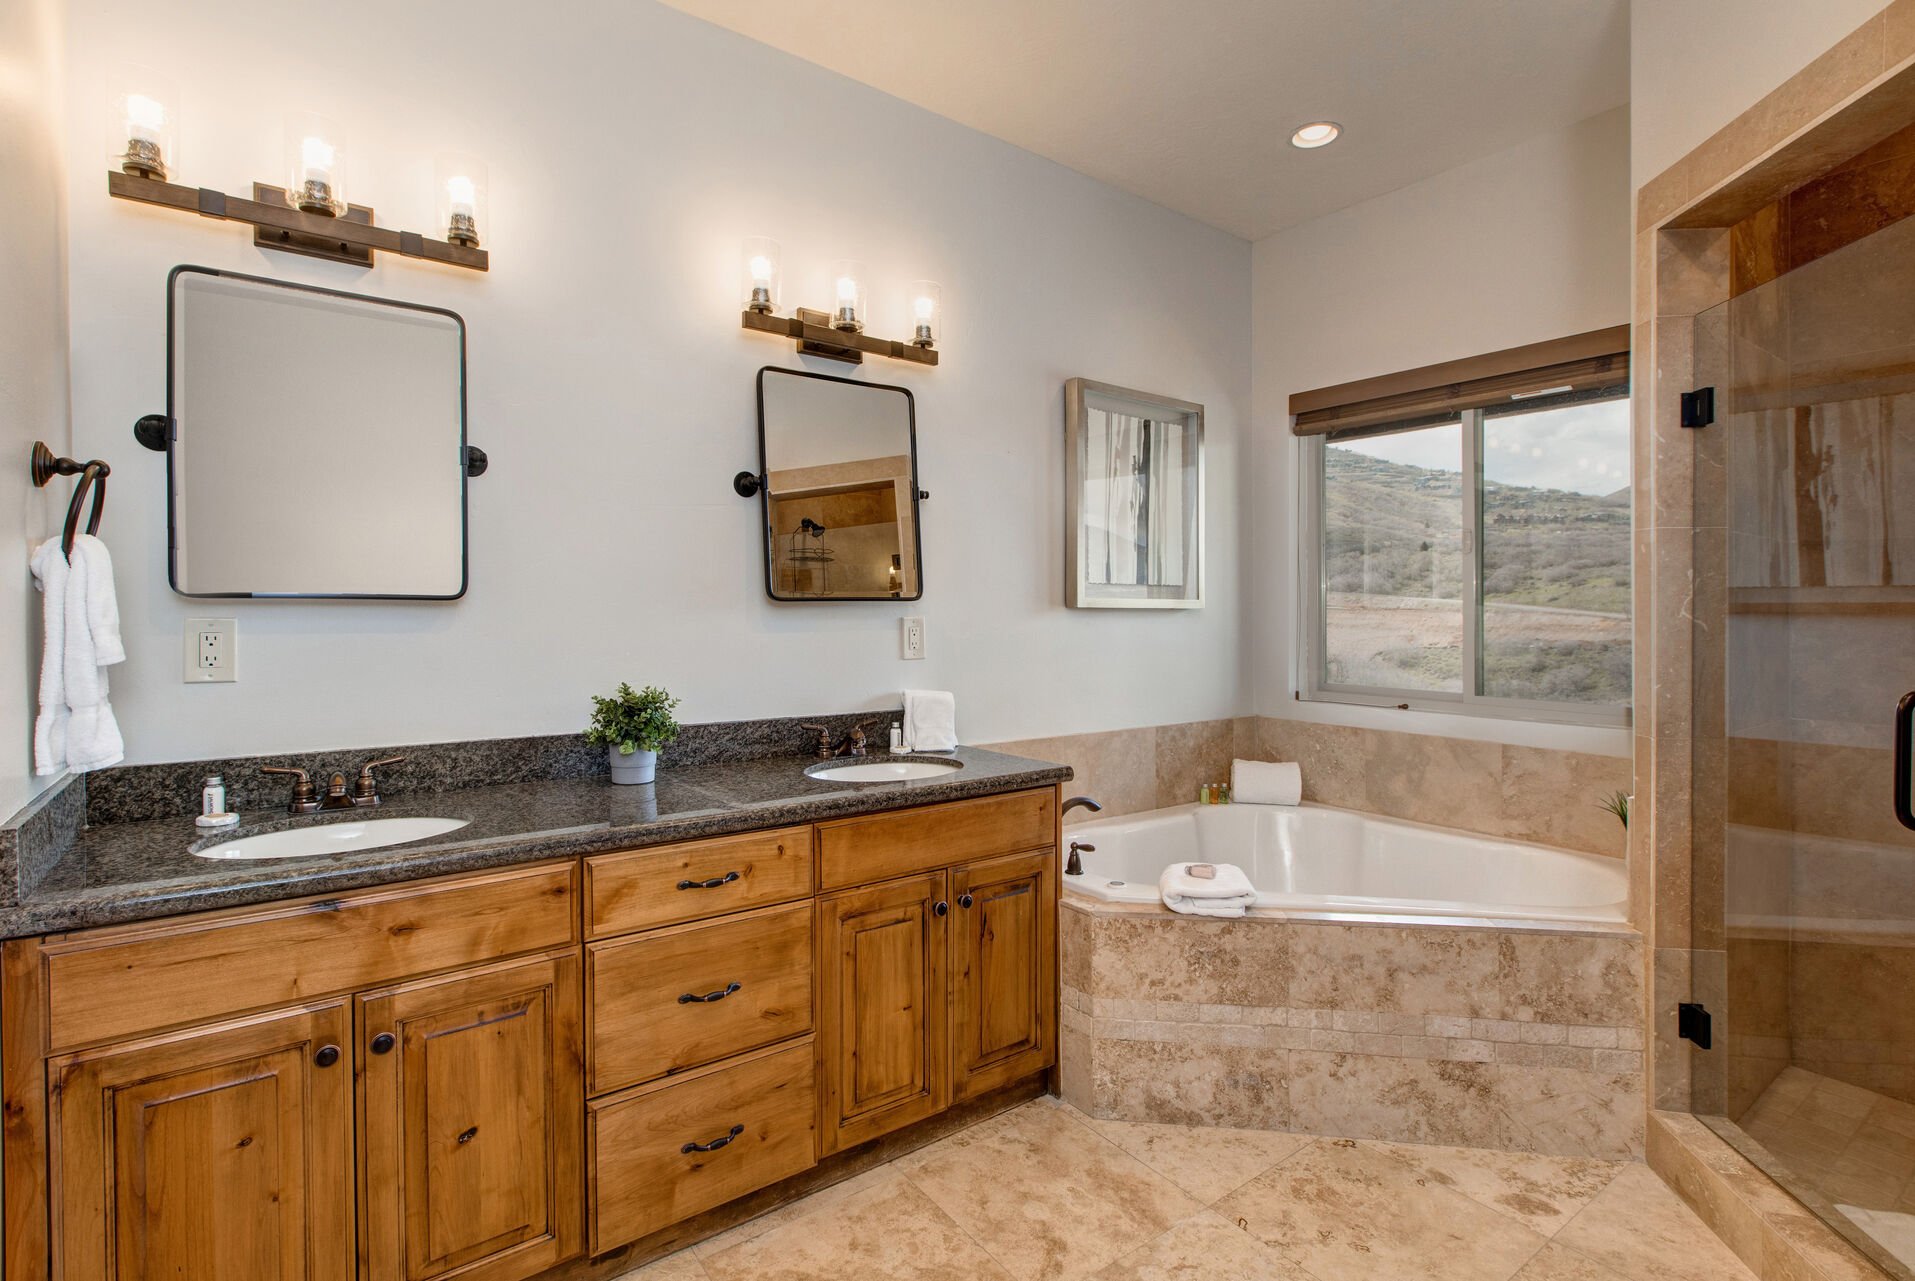 Full Shared Bath 3 with Dual Granite Counter Sinks, Jetted Tub and Separate Shower